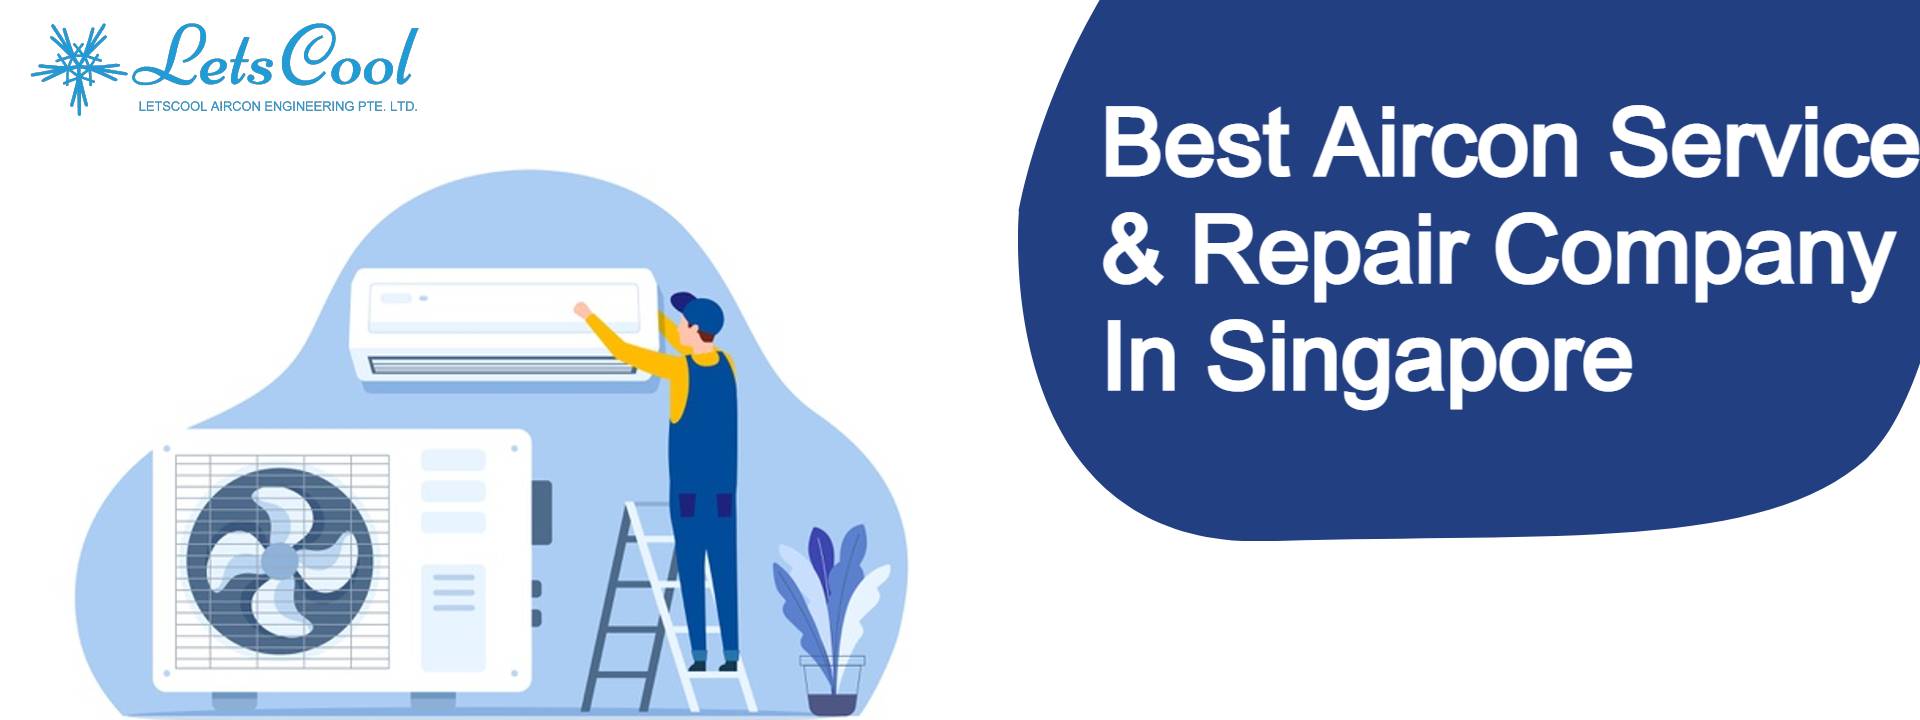 best aircon service company in singapore